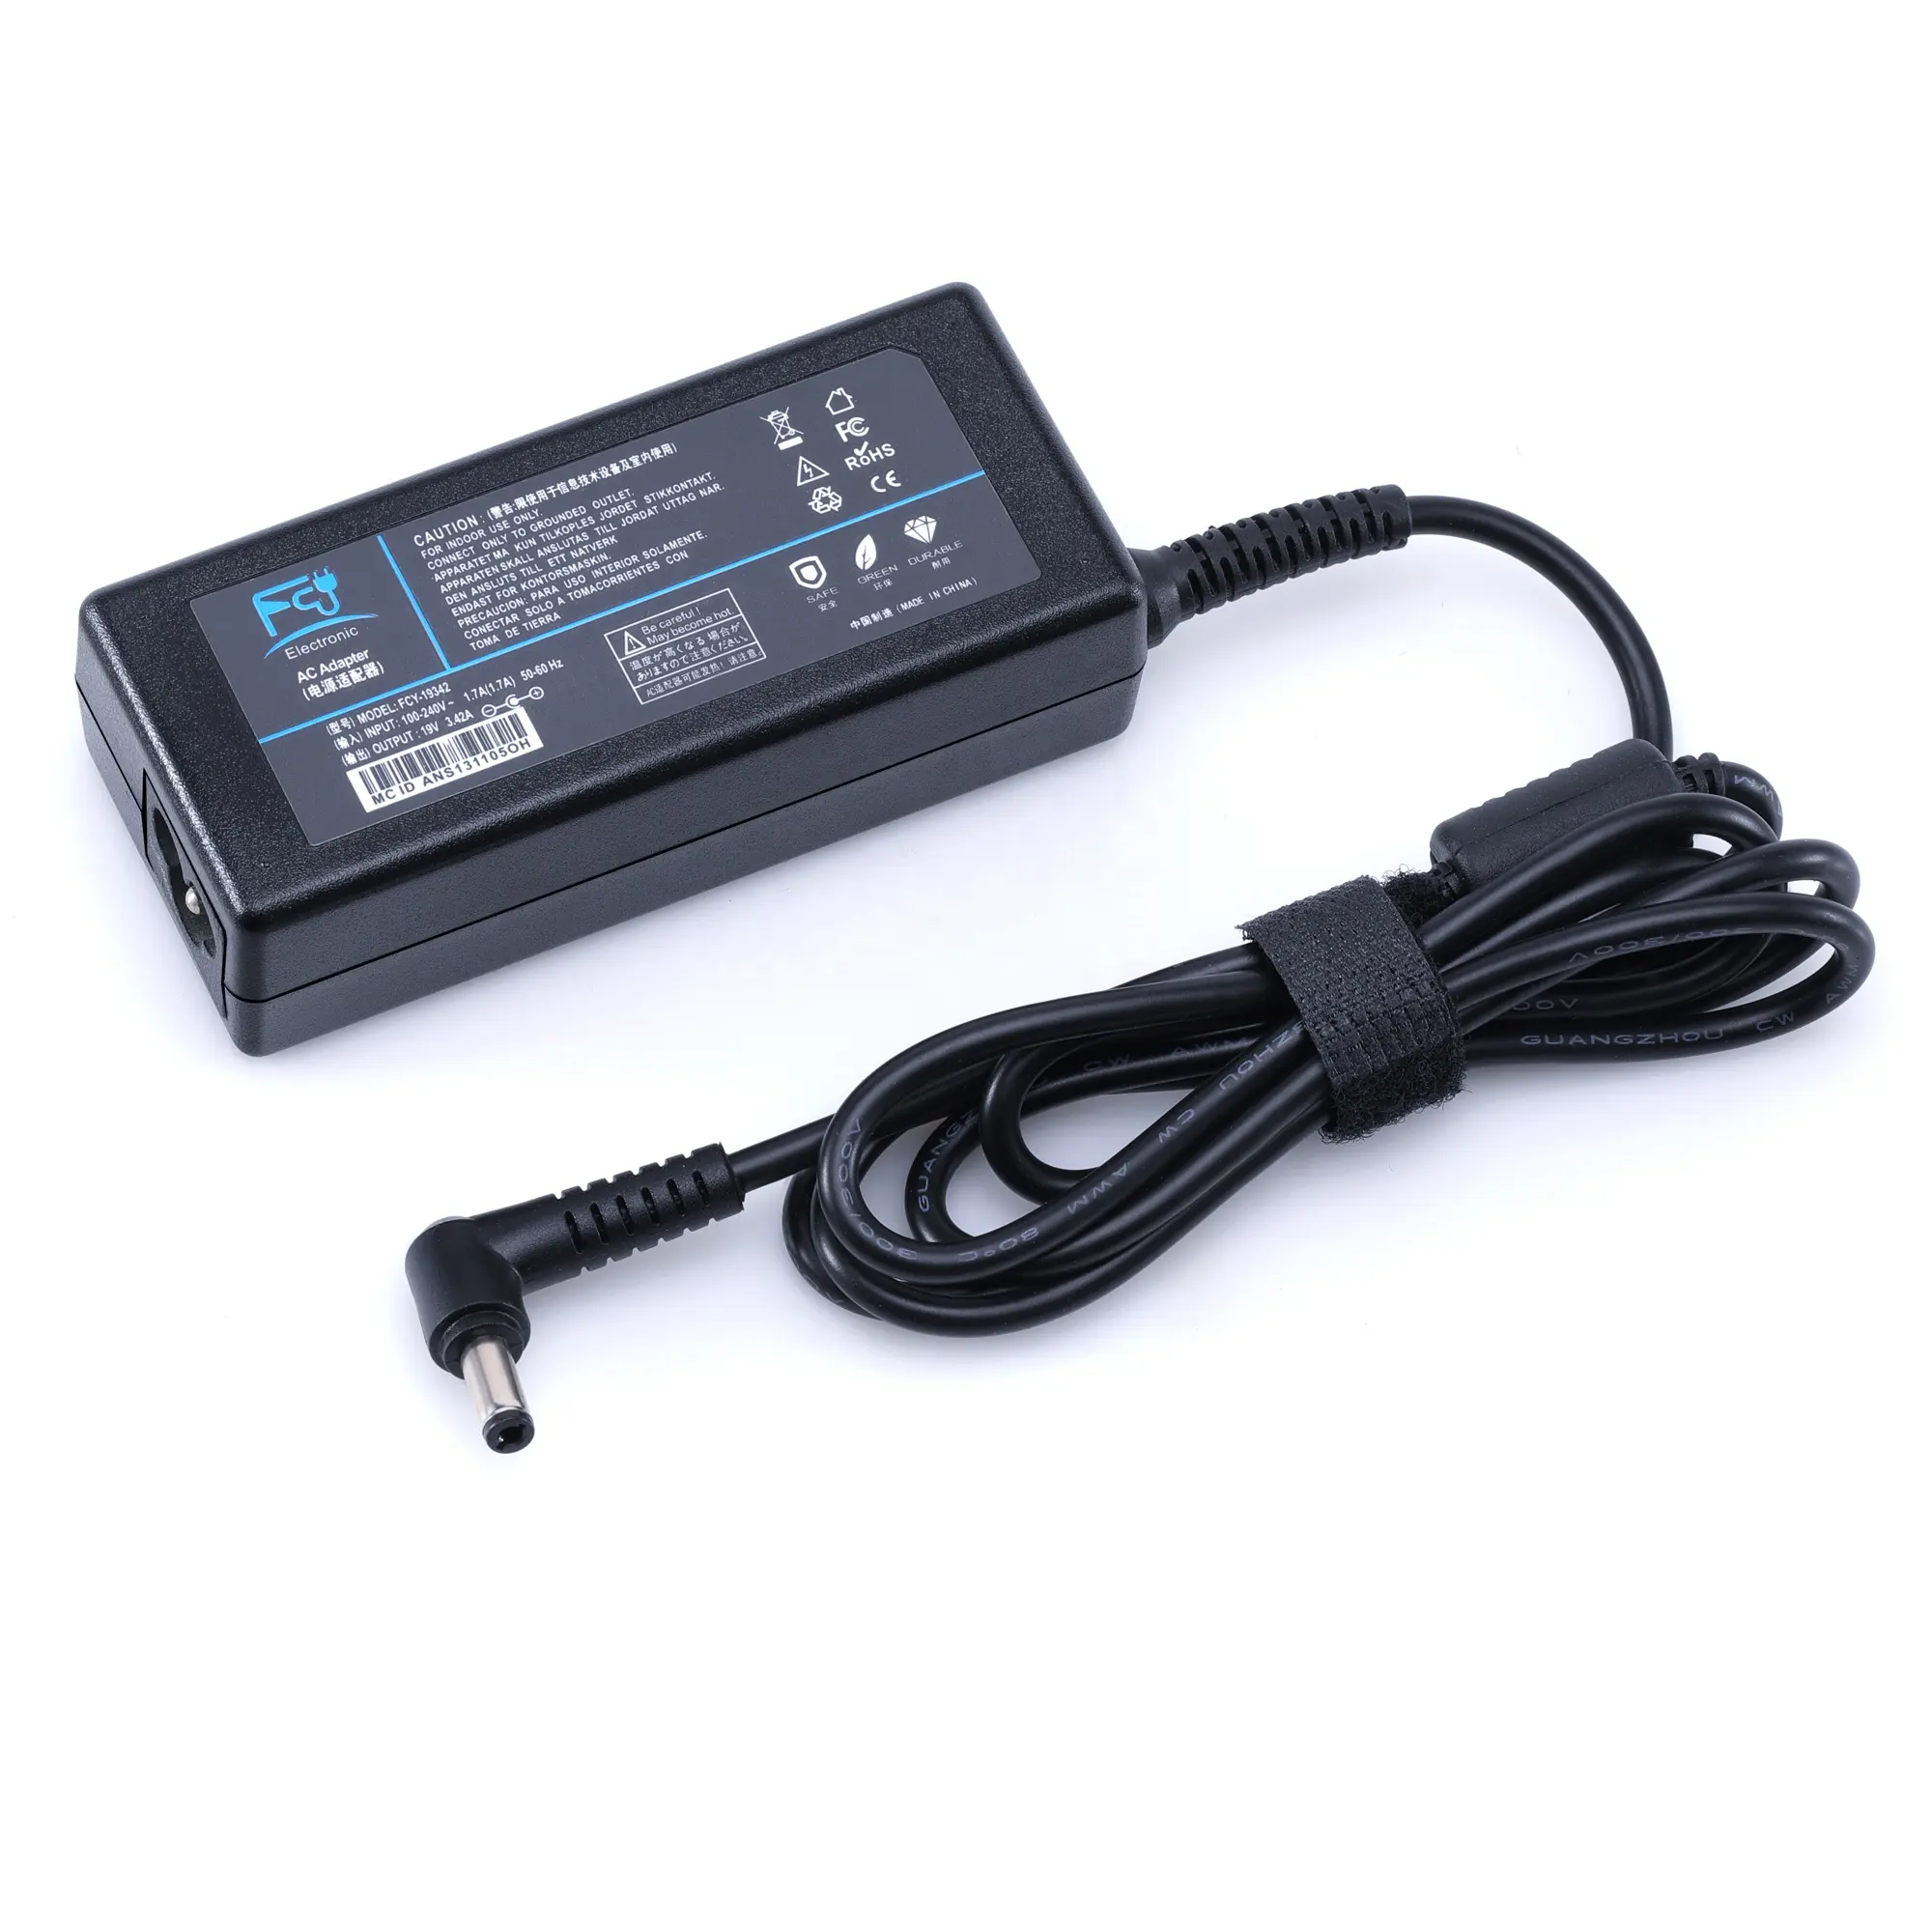 19V 3.42A Laptop Charger 65W AC Power Adapter Replacement For Toshiba/Acer/HP/Lenovo/Gateway/LG/Samsung/Monitors/Chromebook